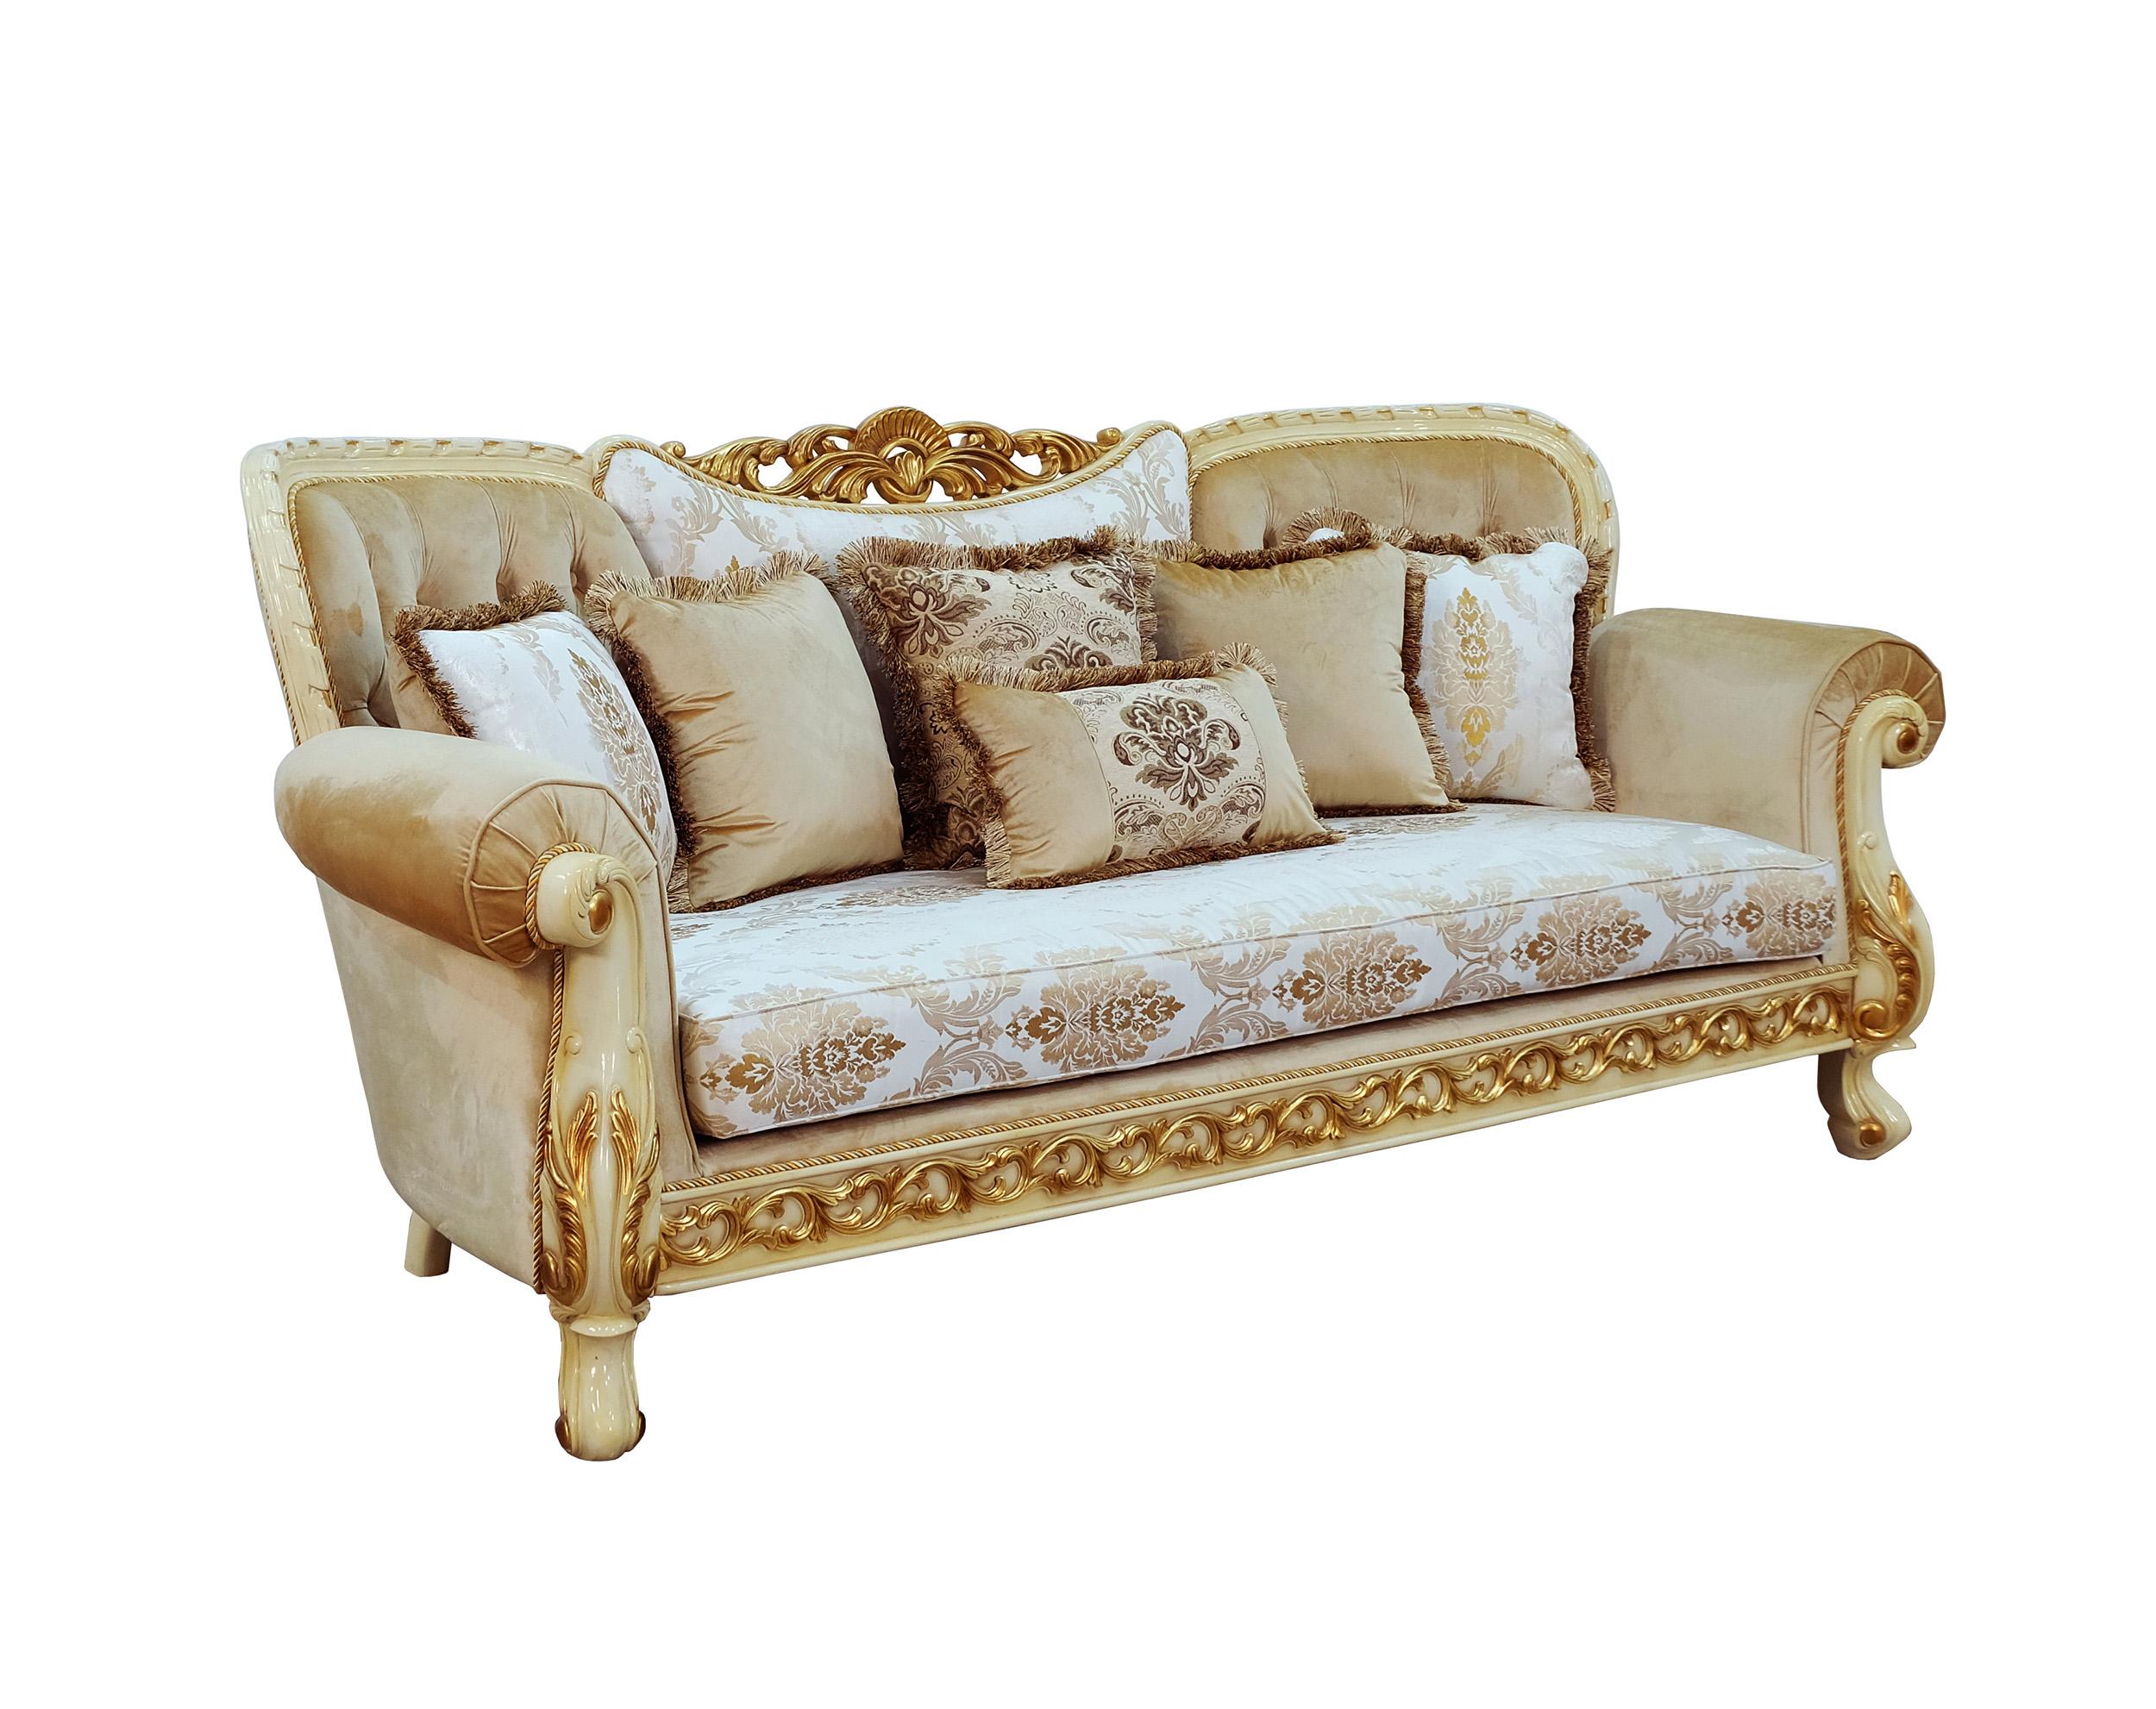 Classic, Traditional Sofa FANTASIA 40015-S in Off-White, Sand, Gold Fabric